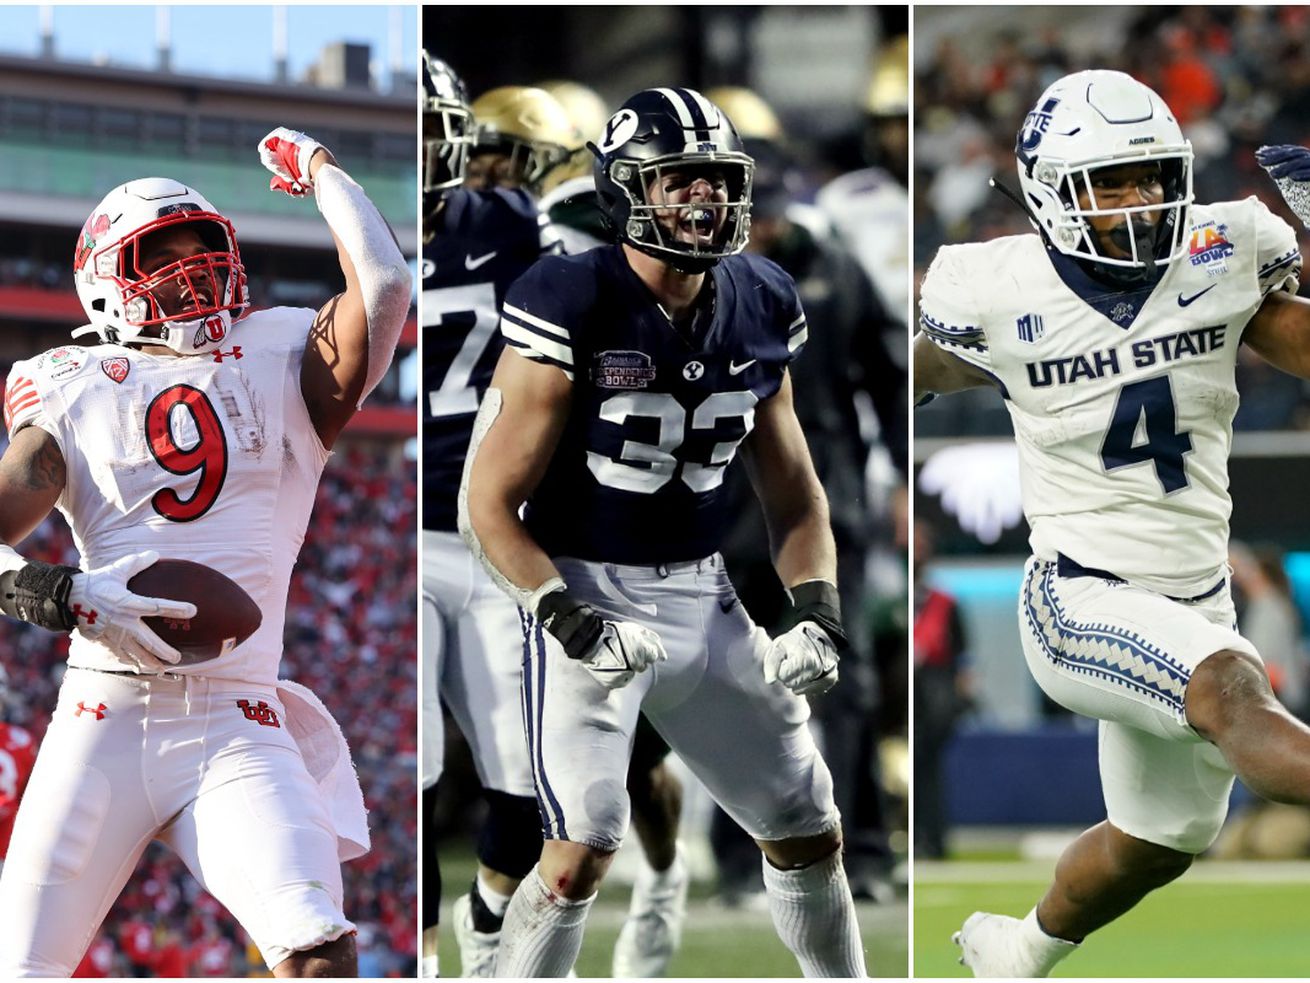 Utah, BYU and Utah State all finished the 2021 college football season in the final Associated Press top 25 rankings.